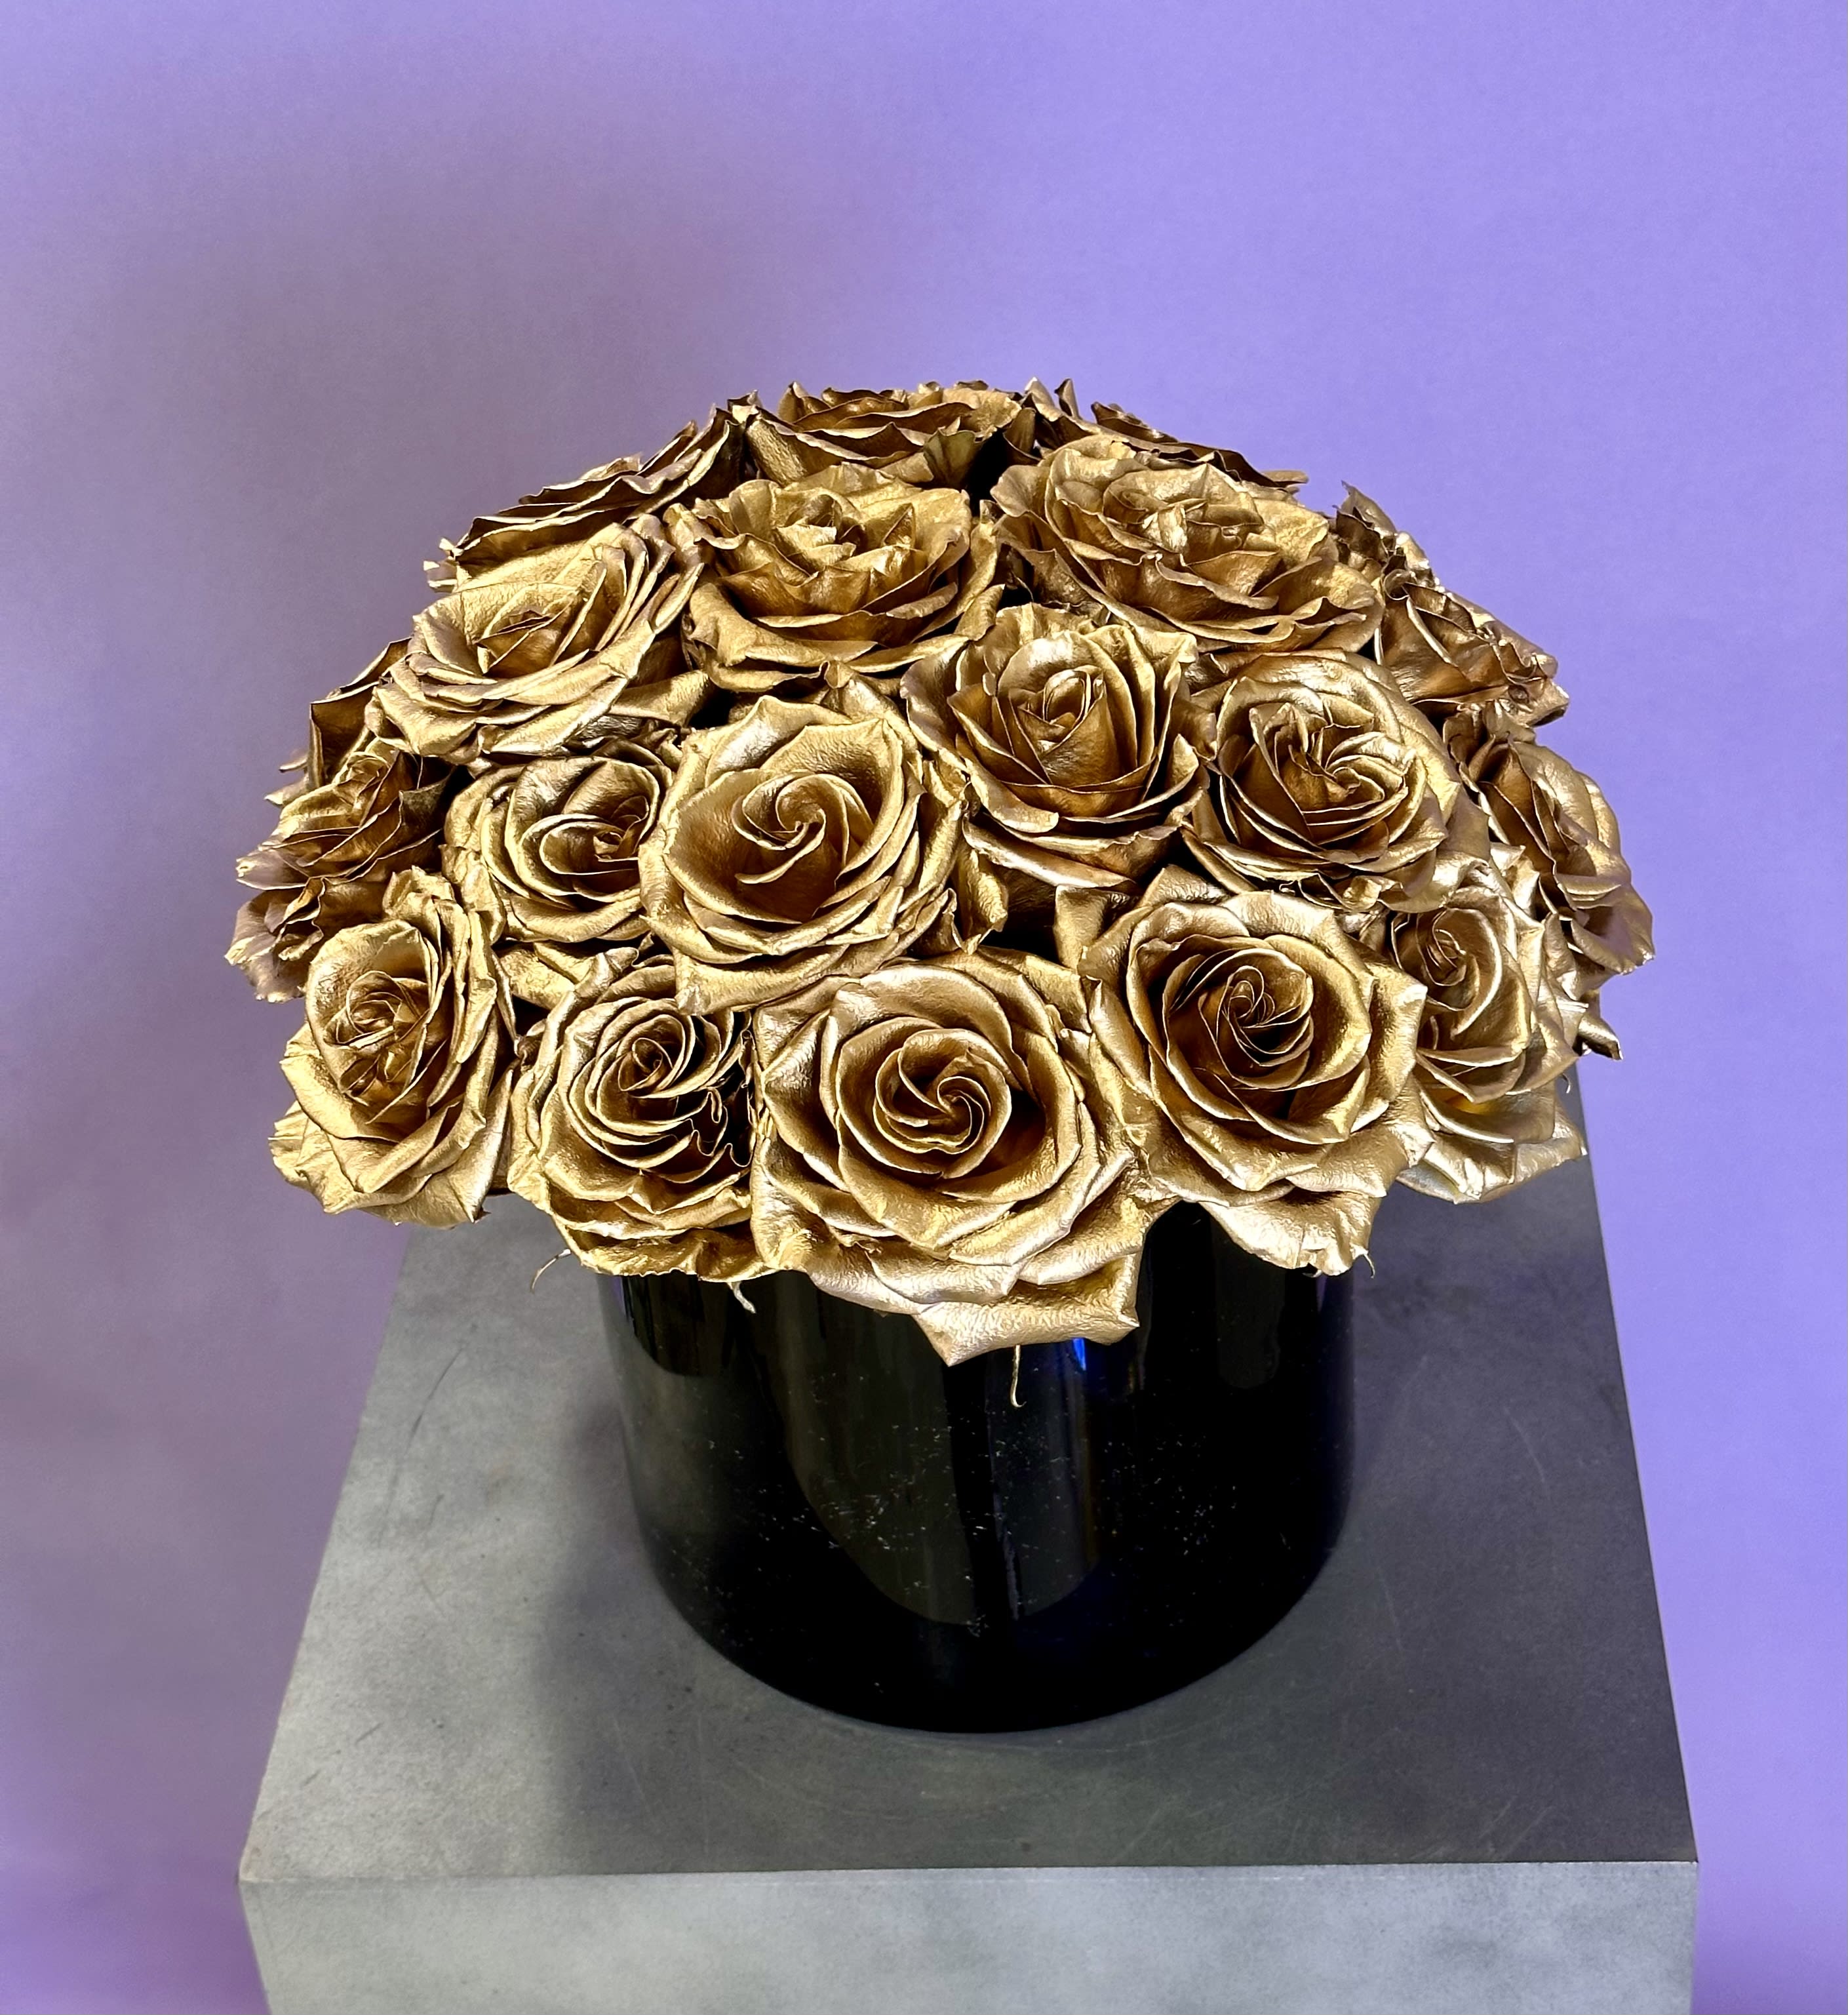 Gold Rush - 2 dozen hand painted gold roses styled in a tight dome. A beautiful holiday gift for anyone who loves gold!